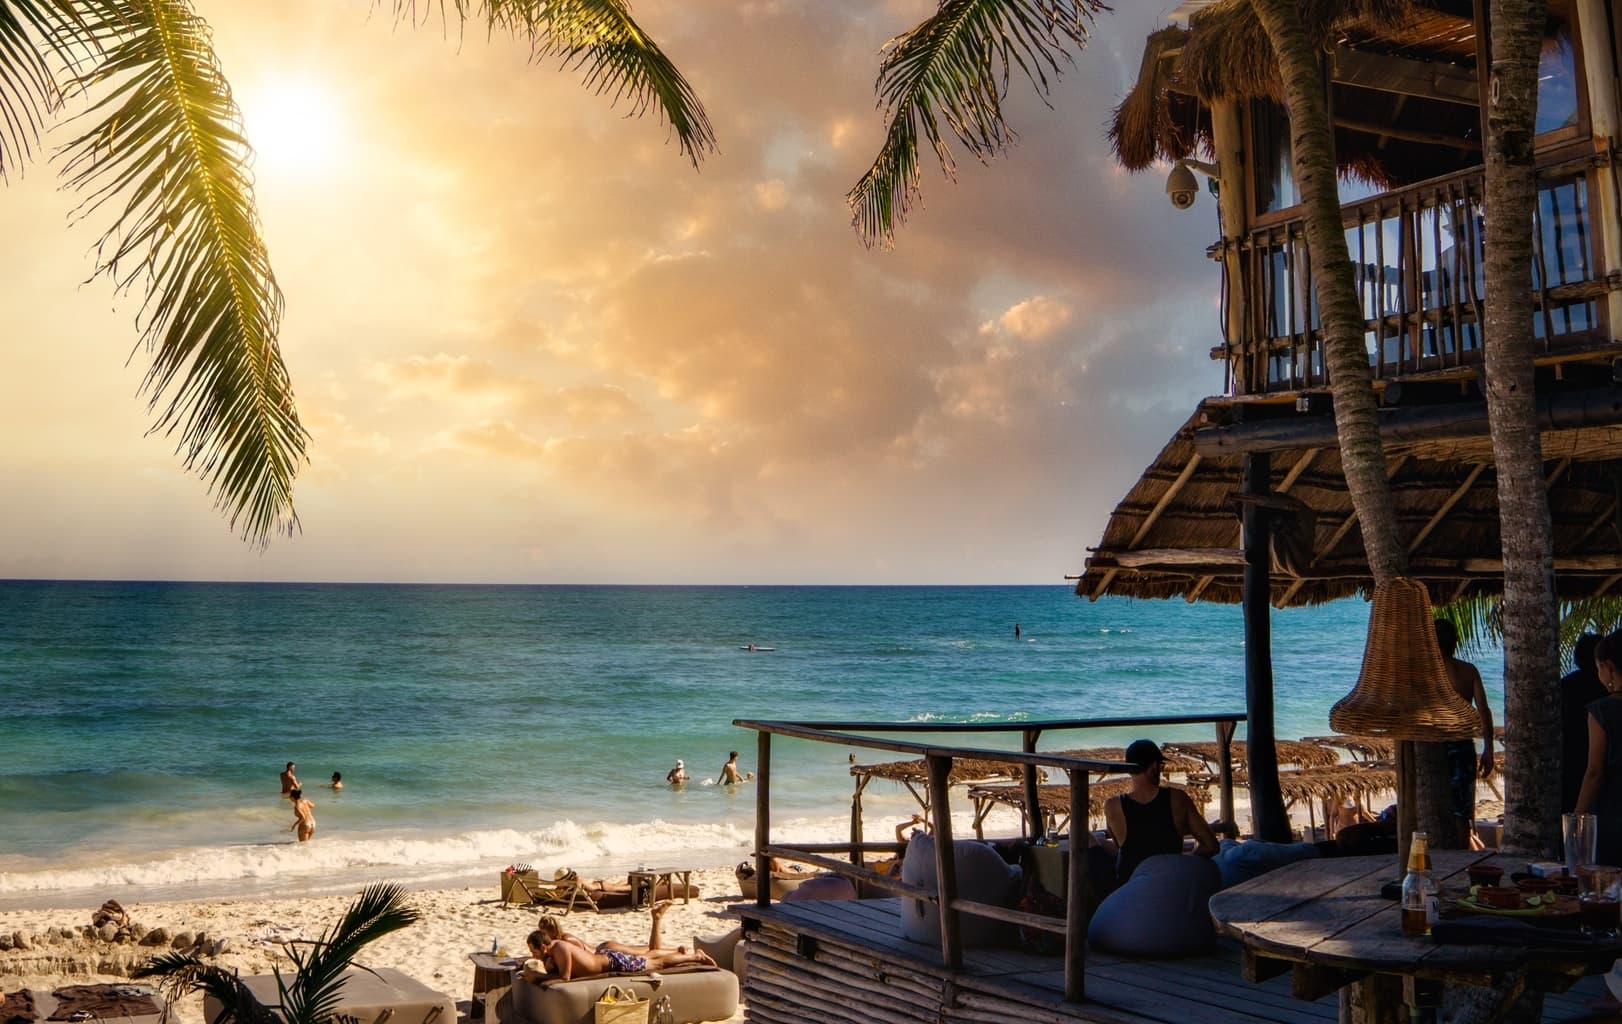 How travel and spend the New Year's Eve in Tulum Mexico during 2020